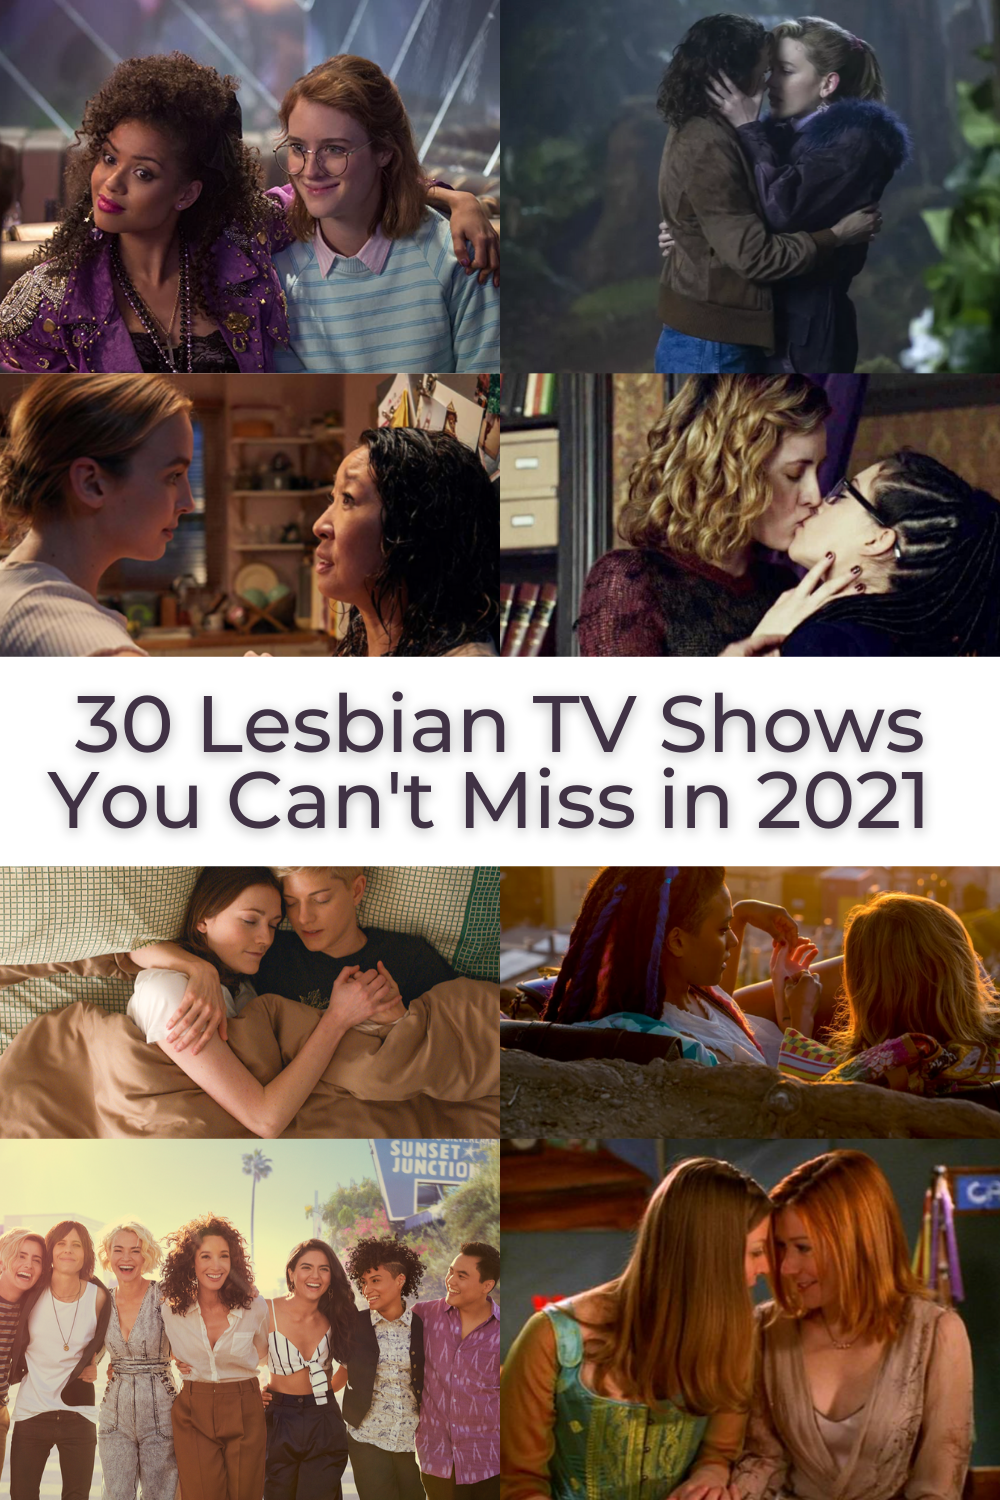 The 30 Best Queer and Lesbian TV Shows in 2021 image